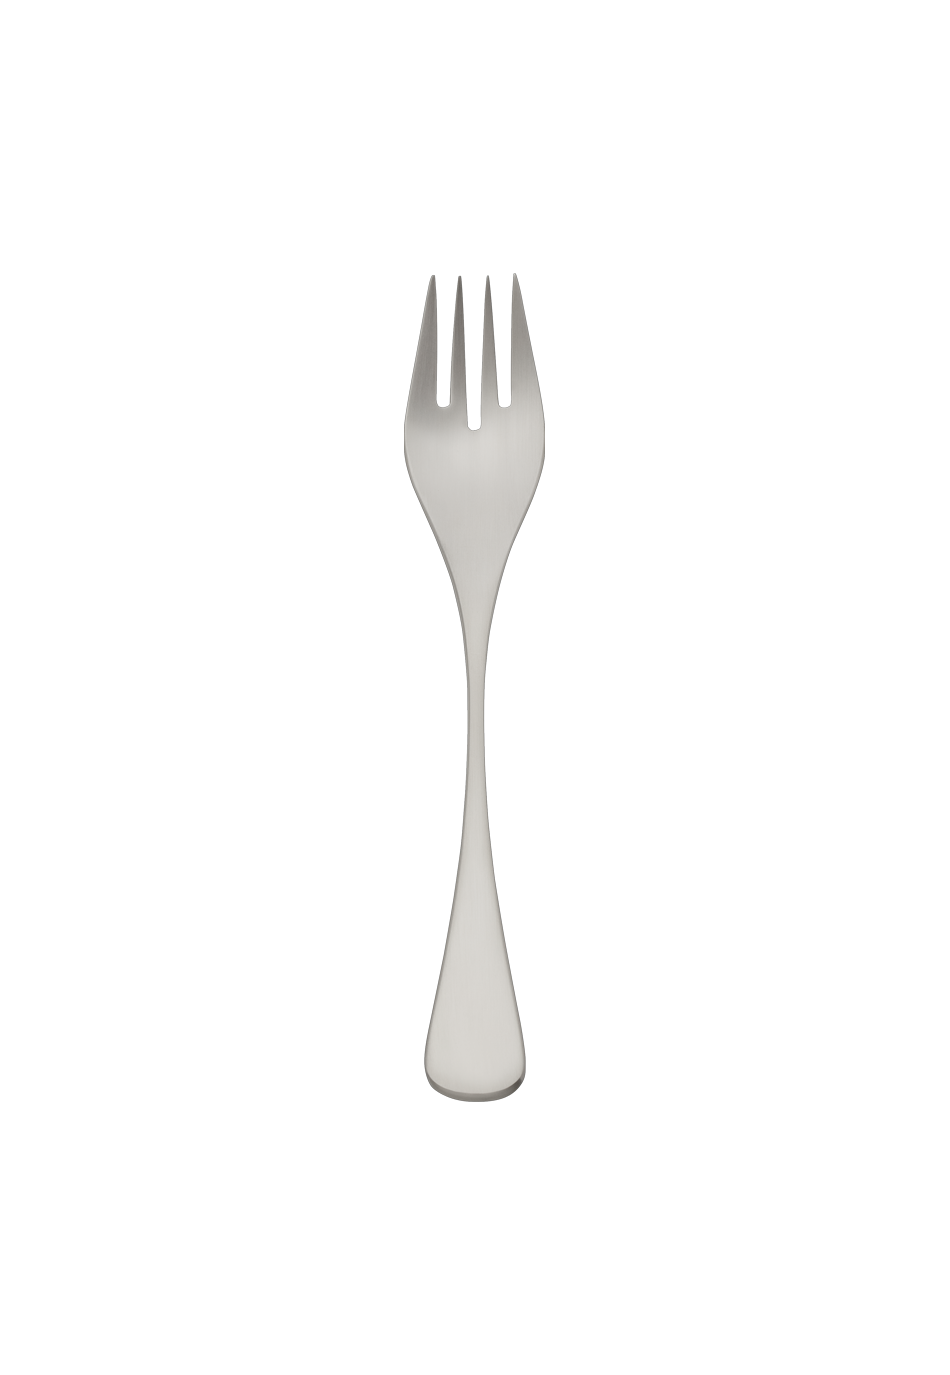 Scandia Fish Fork (18/8 stainless steel)